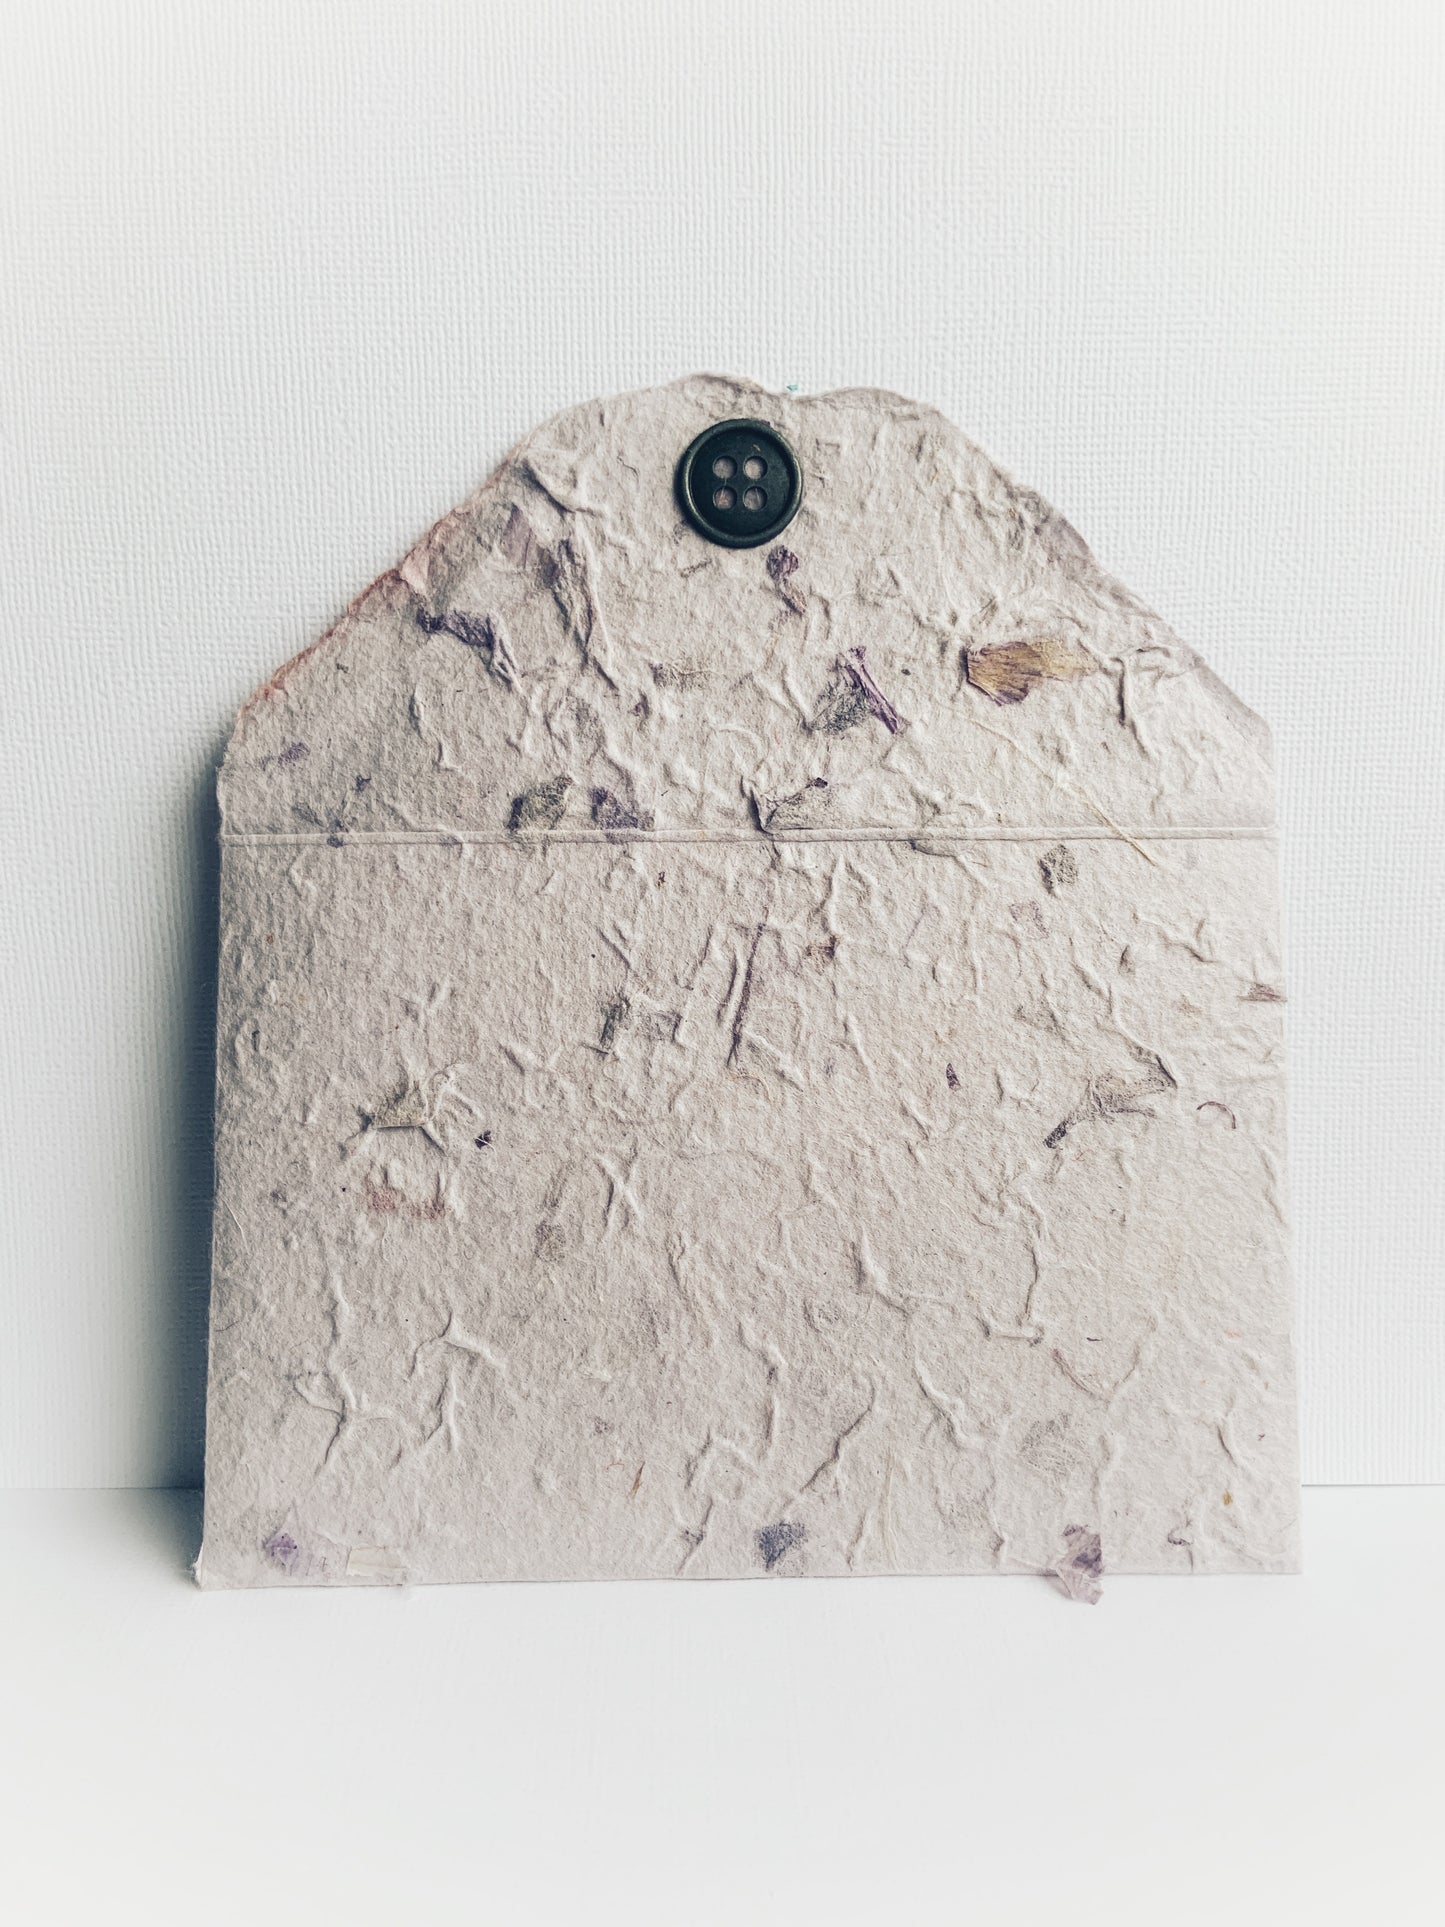 Front of a handmade envelope made from mauve handmade paper from Thailand showing detail on flap and decorative metal button. Small pieces of dried flowers add to the paper's texture.